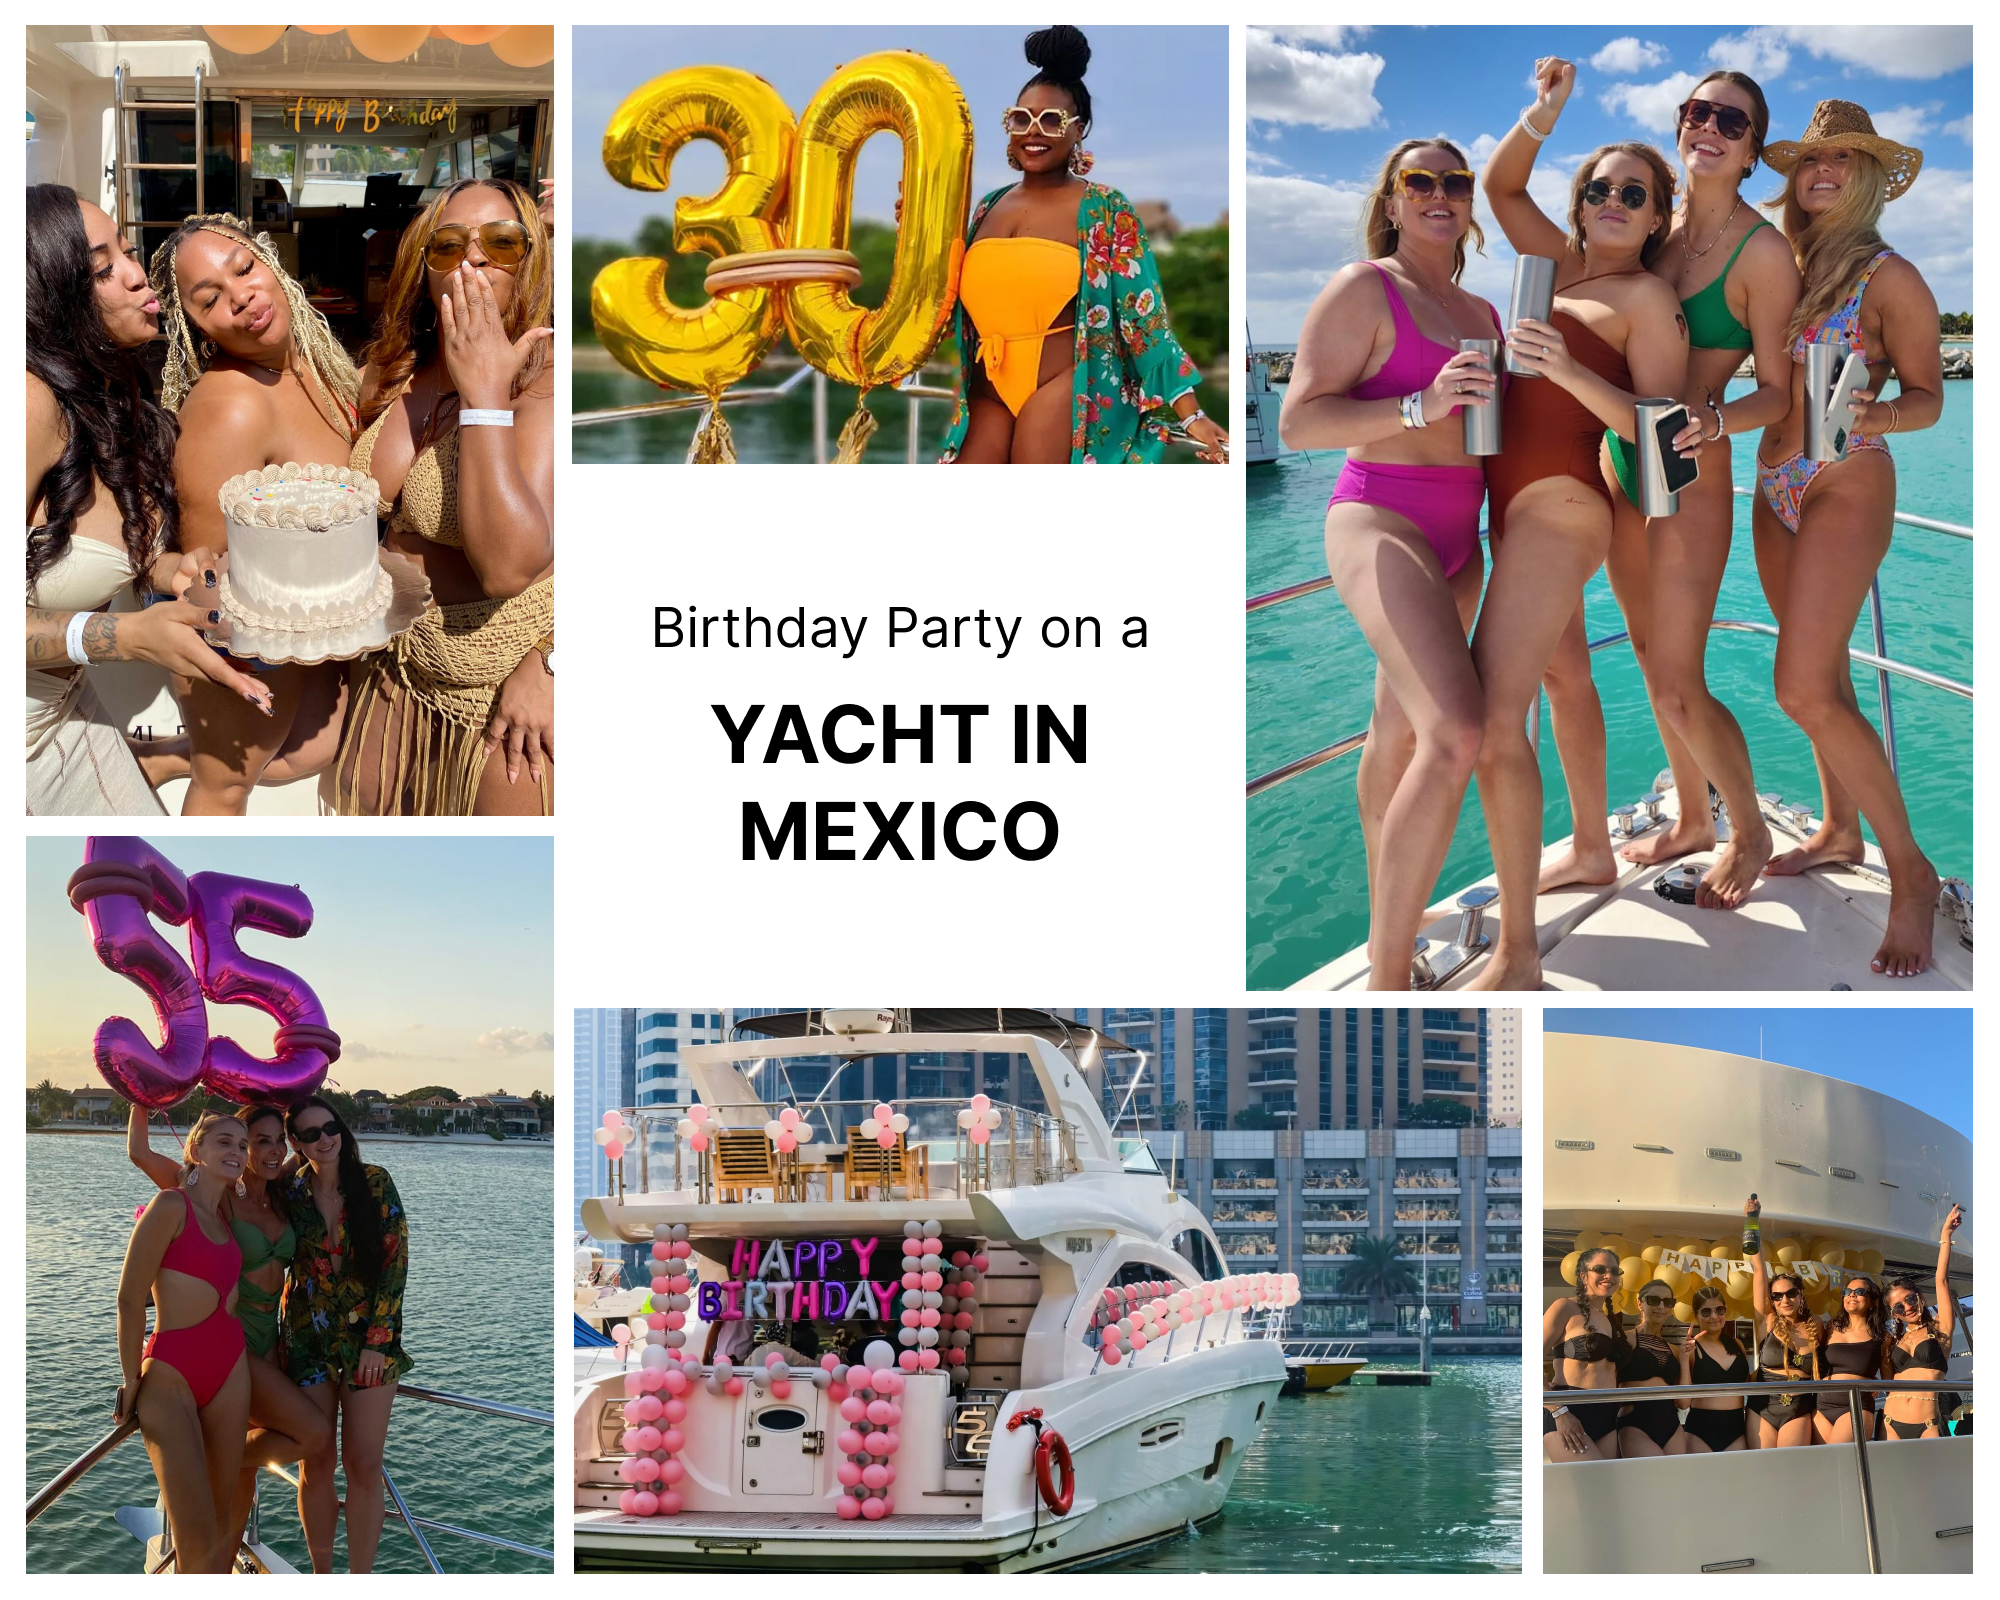 Birthday Party on a Yacht in Mexico